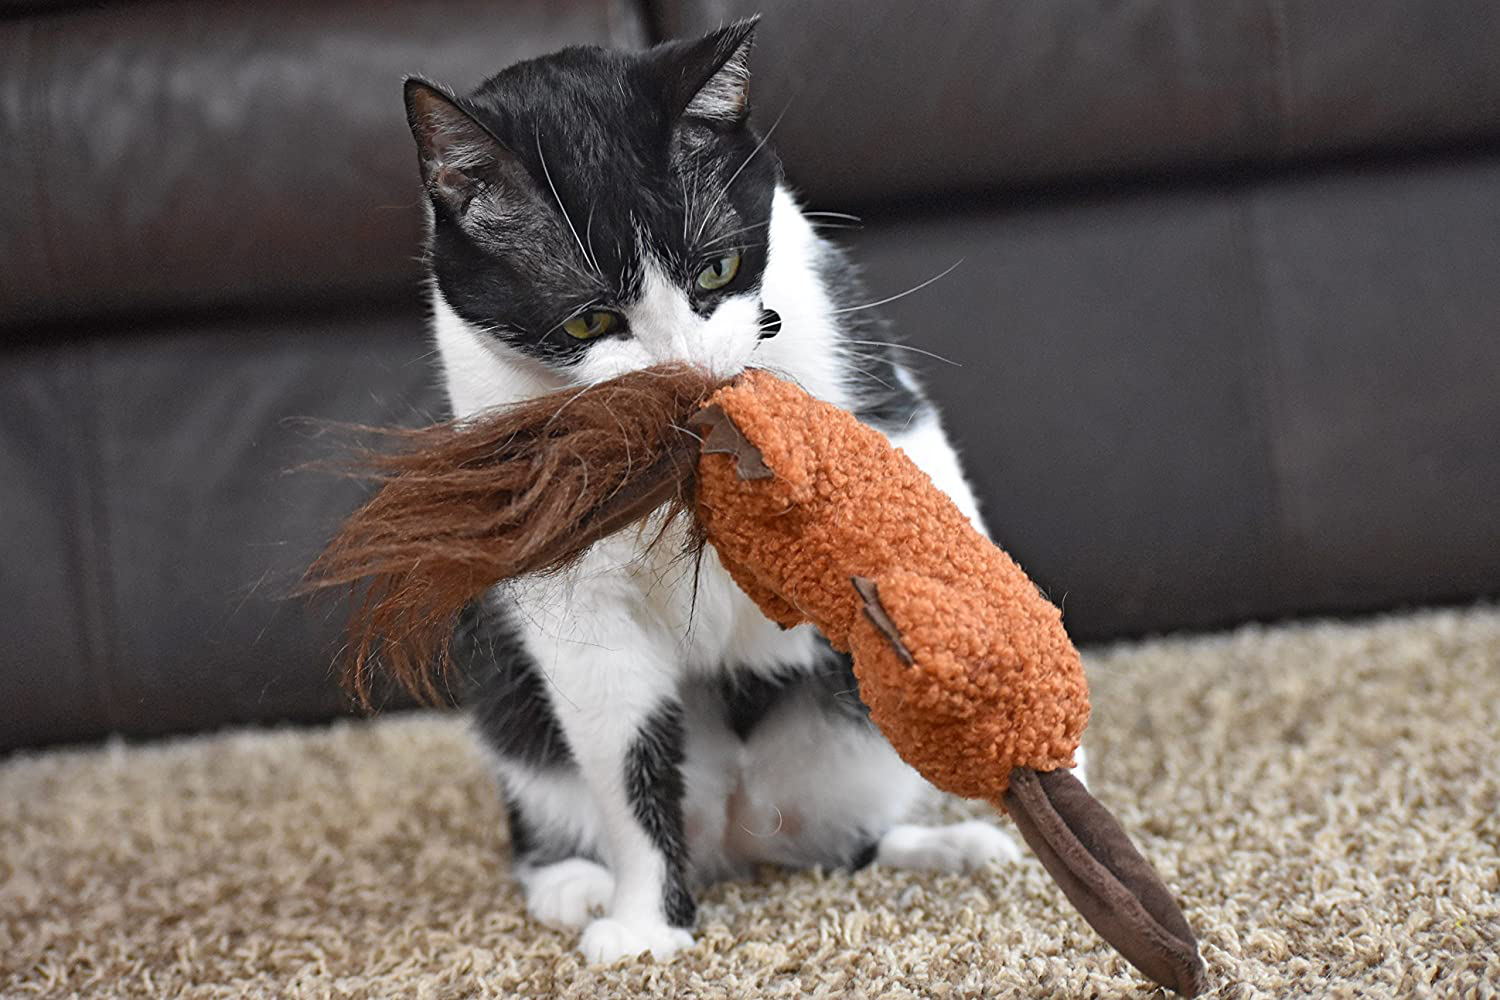 Our Pets SNAG-ABLES Platypus Cat Kicker Cat Toys (Ideal Cat Toys for Indoor Cats for Play & Grooming Nails Just like Cat Scratchers) Great Cat Plush Interactive Cat Toy, Cat Gifts, and Catnip Toys Animals & Pet Supplies > Pet Supplies > Cat Supplies > Cat Toys Our Pets   